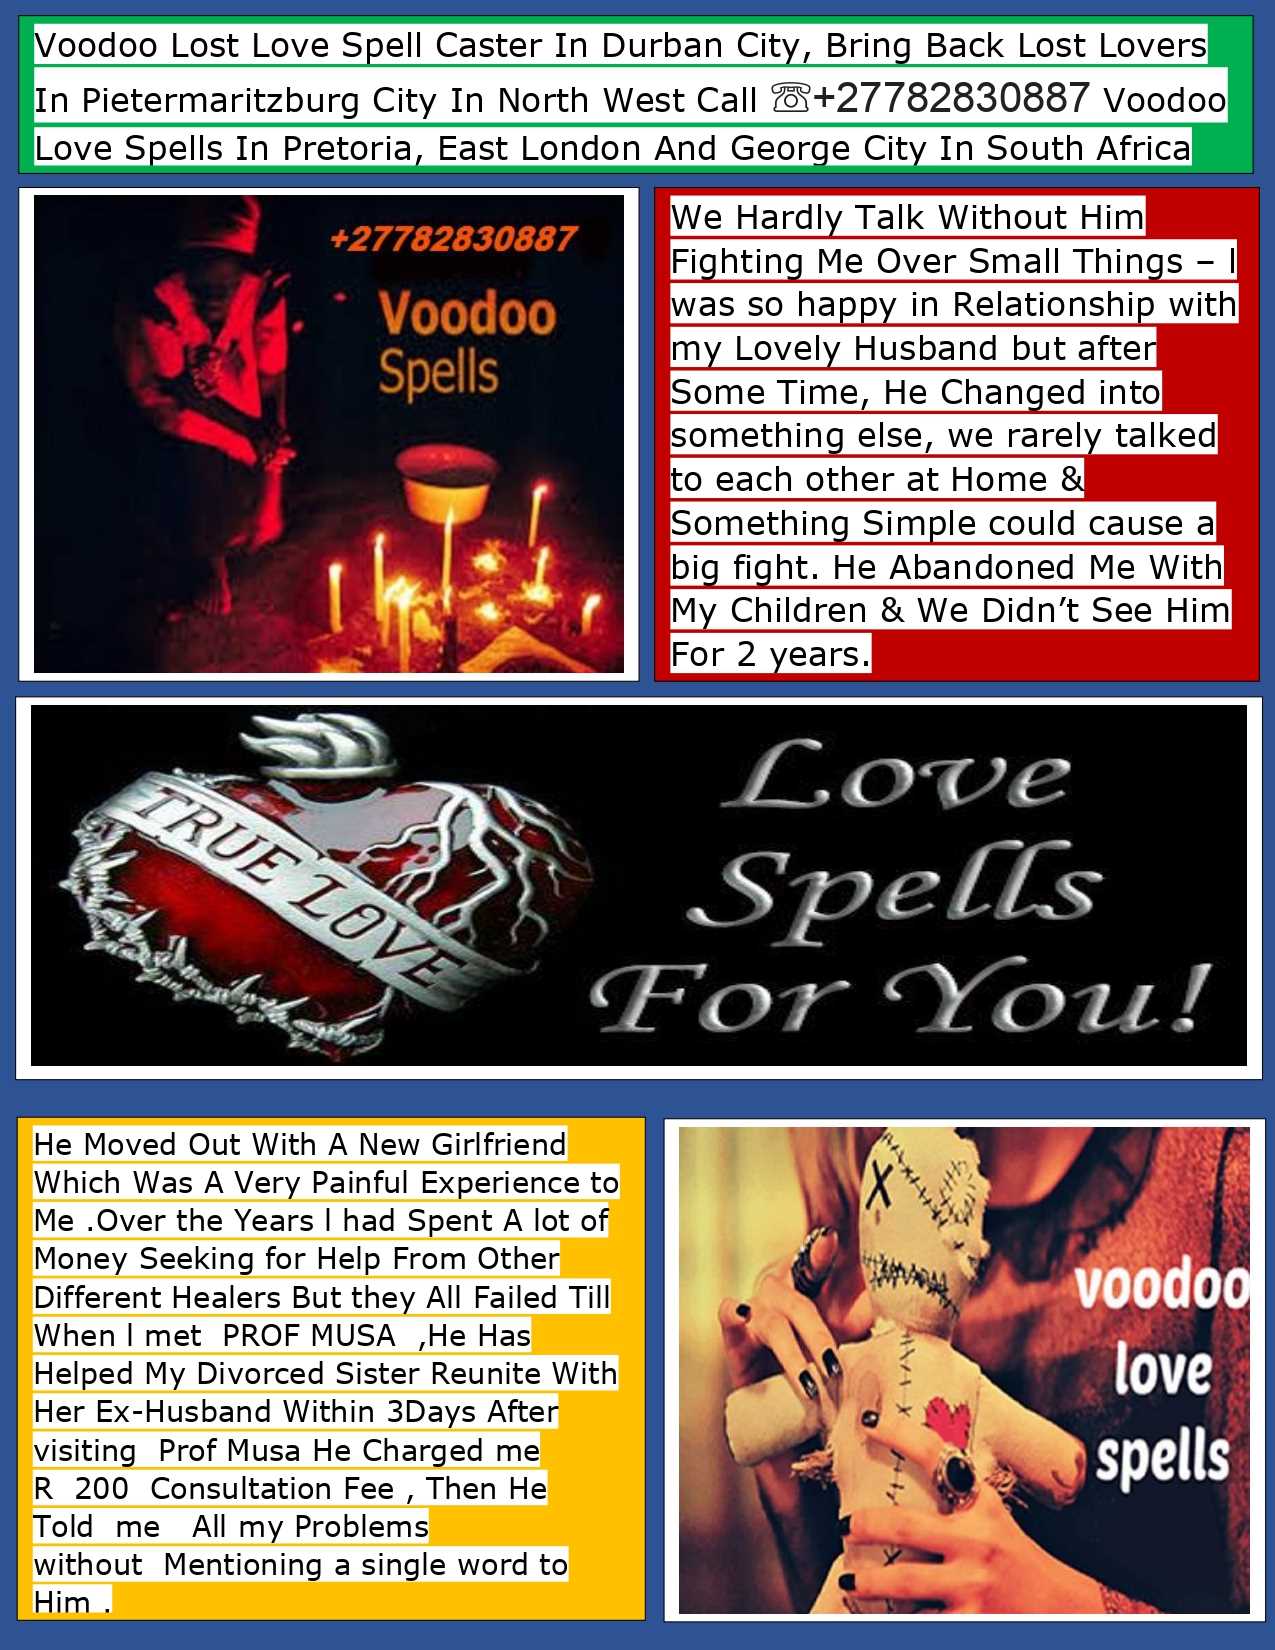 Voodoo Lost Love Spell Caster In Durban Bring Back Lost Lovers In Soweto Gauteng Call ☏ +27782830887 Voodoo Love Spells In Pietermaritzburg South Africa And San Lorenzo Town in Mexico